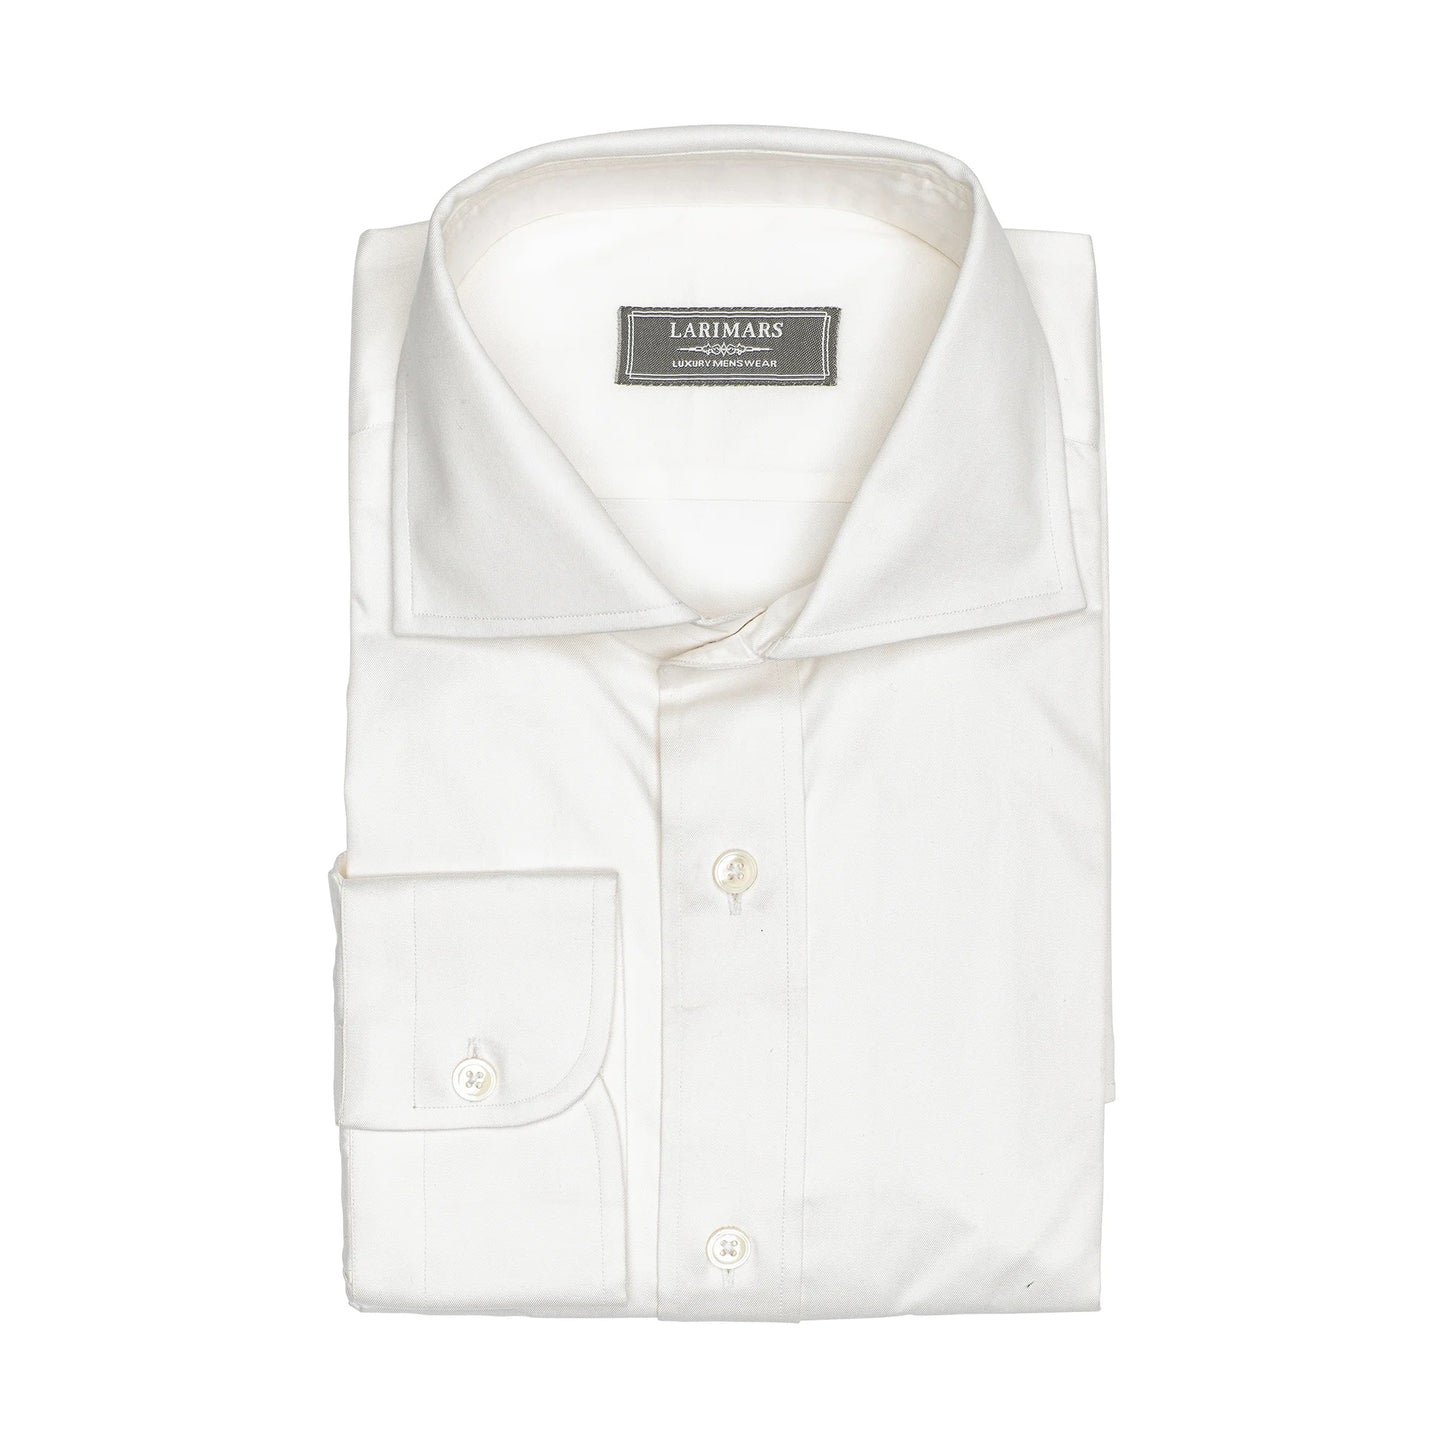 Off White Fine Twill - Larimars Clothing Men's Formal and casual wear shirts